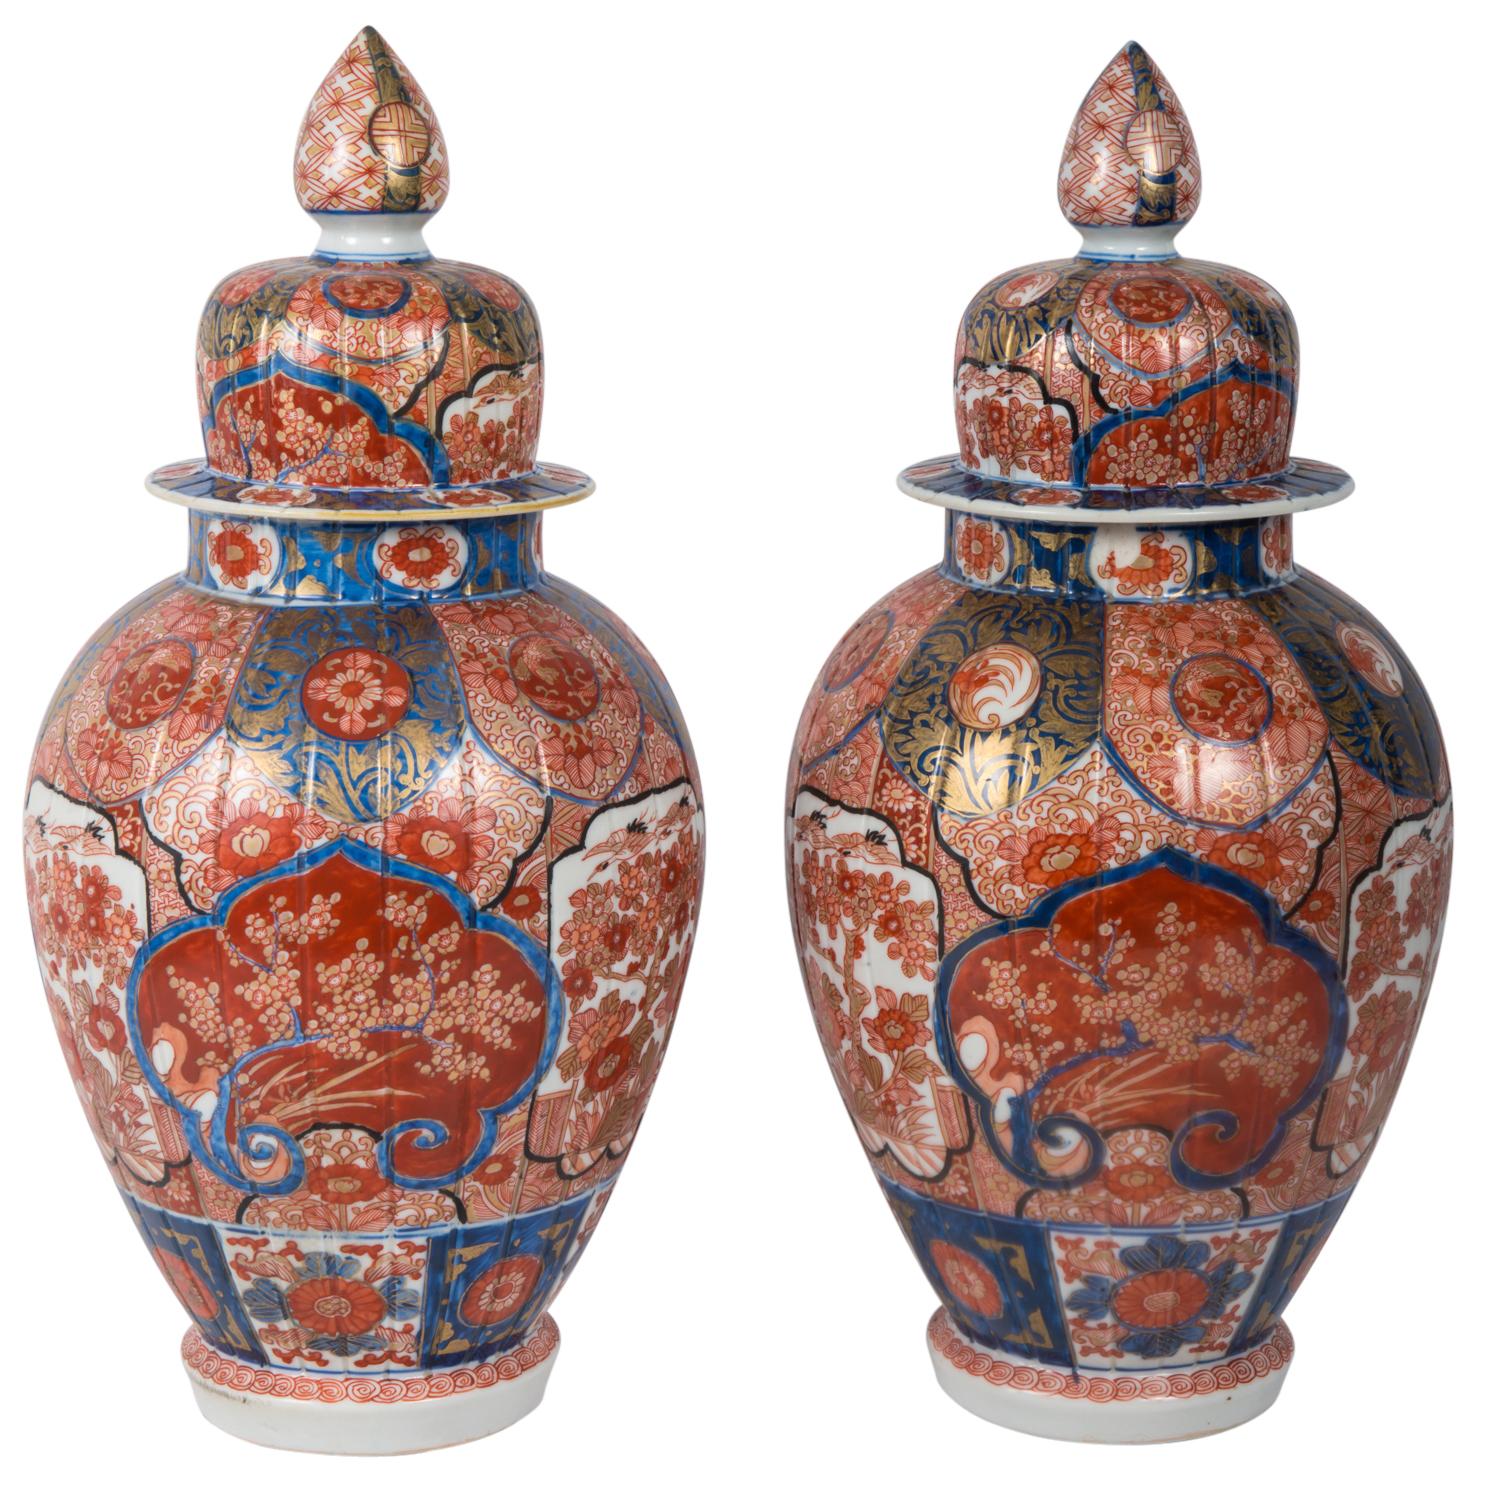 A fine quality pair of late 19th century Japanese Imari lidded vases, each with classical motif, floral and foliate decoration in the typical red and blue ground colors.